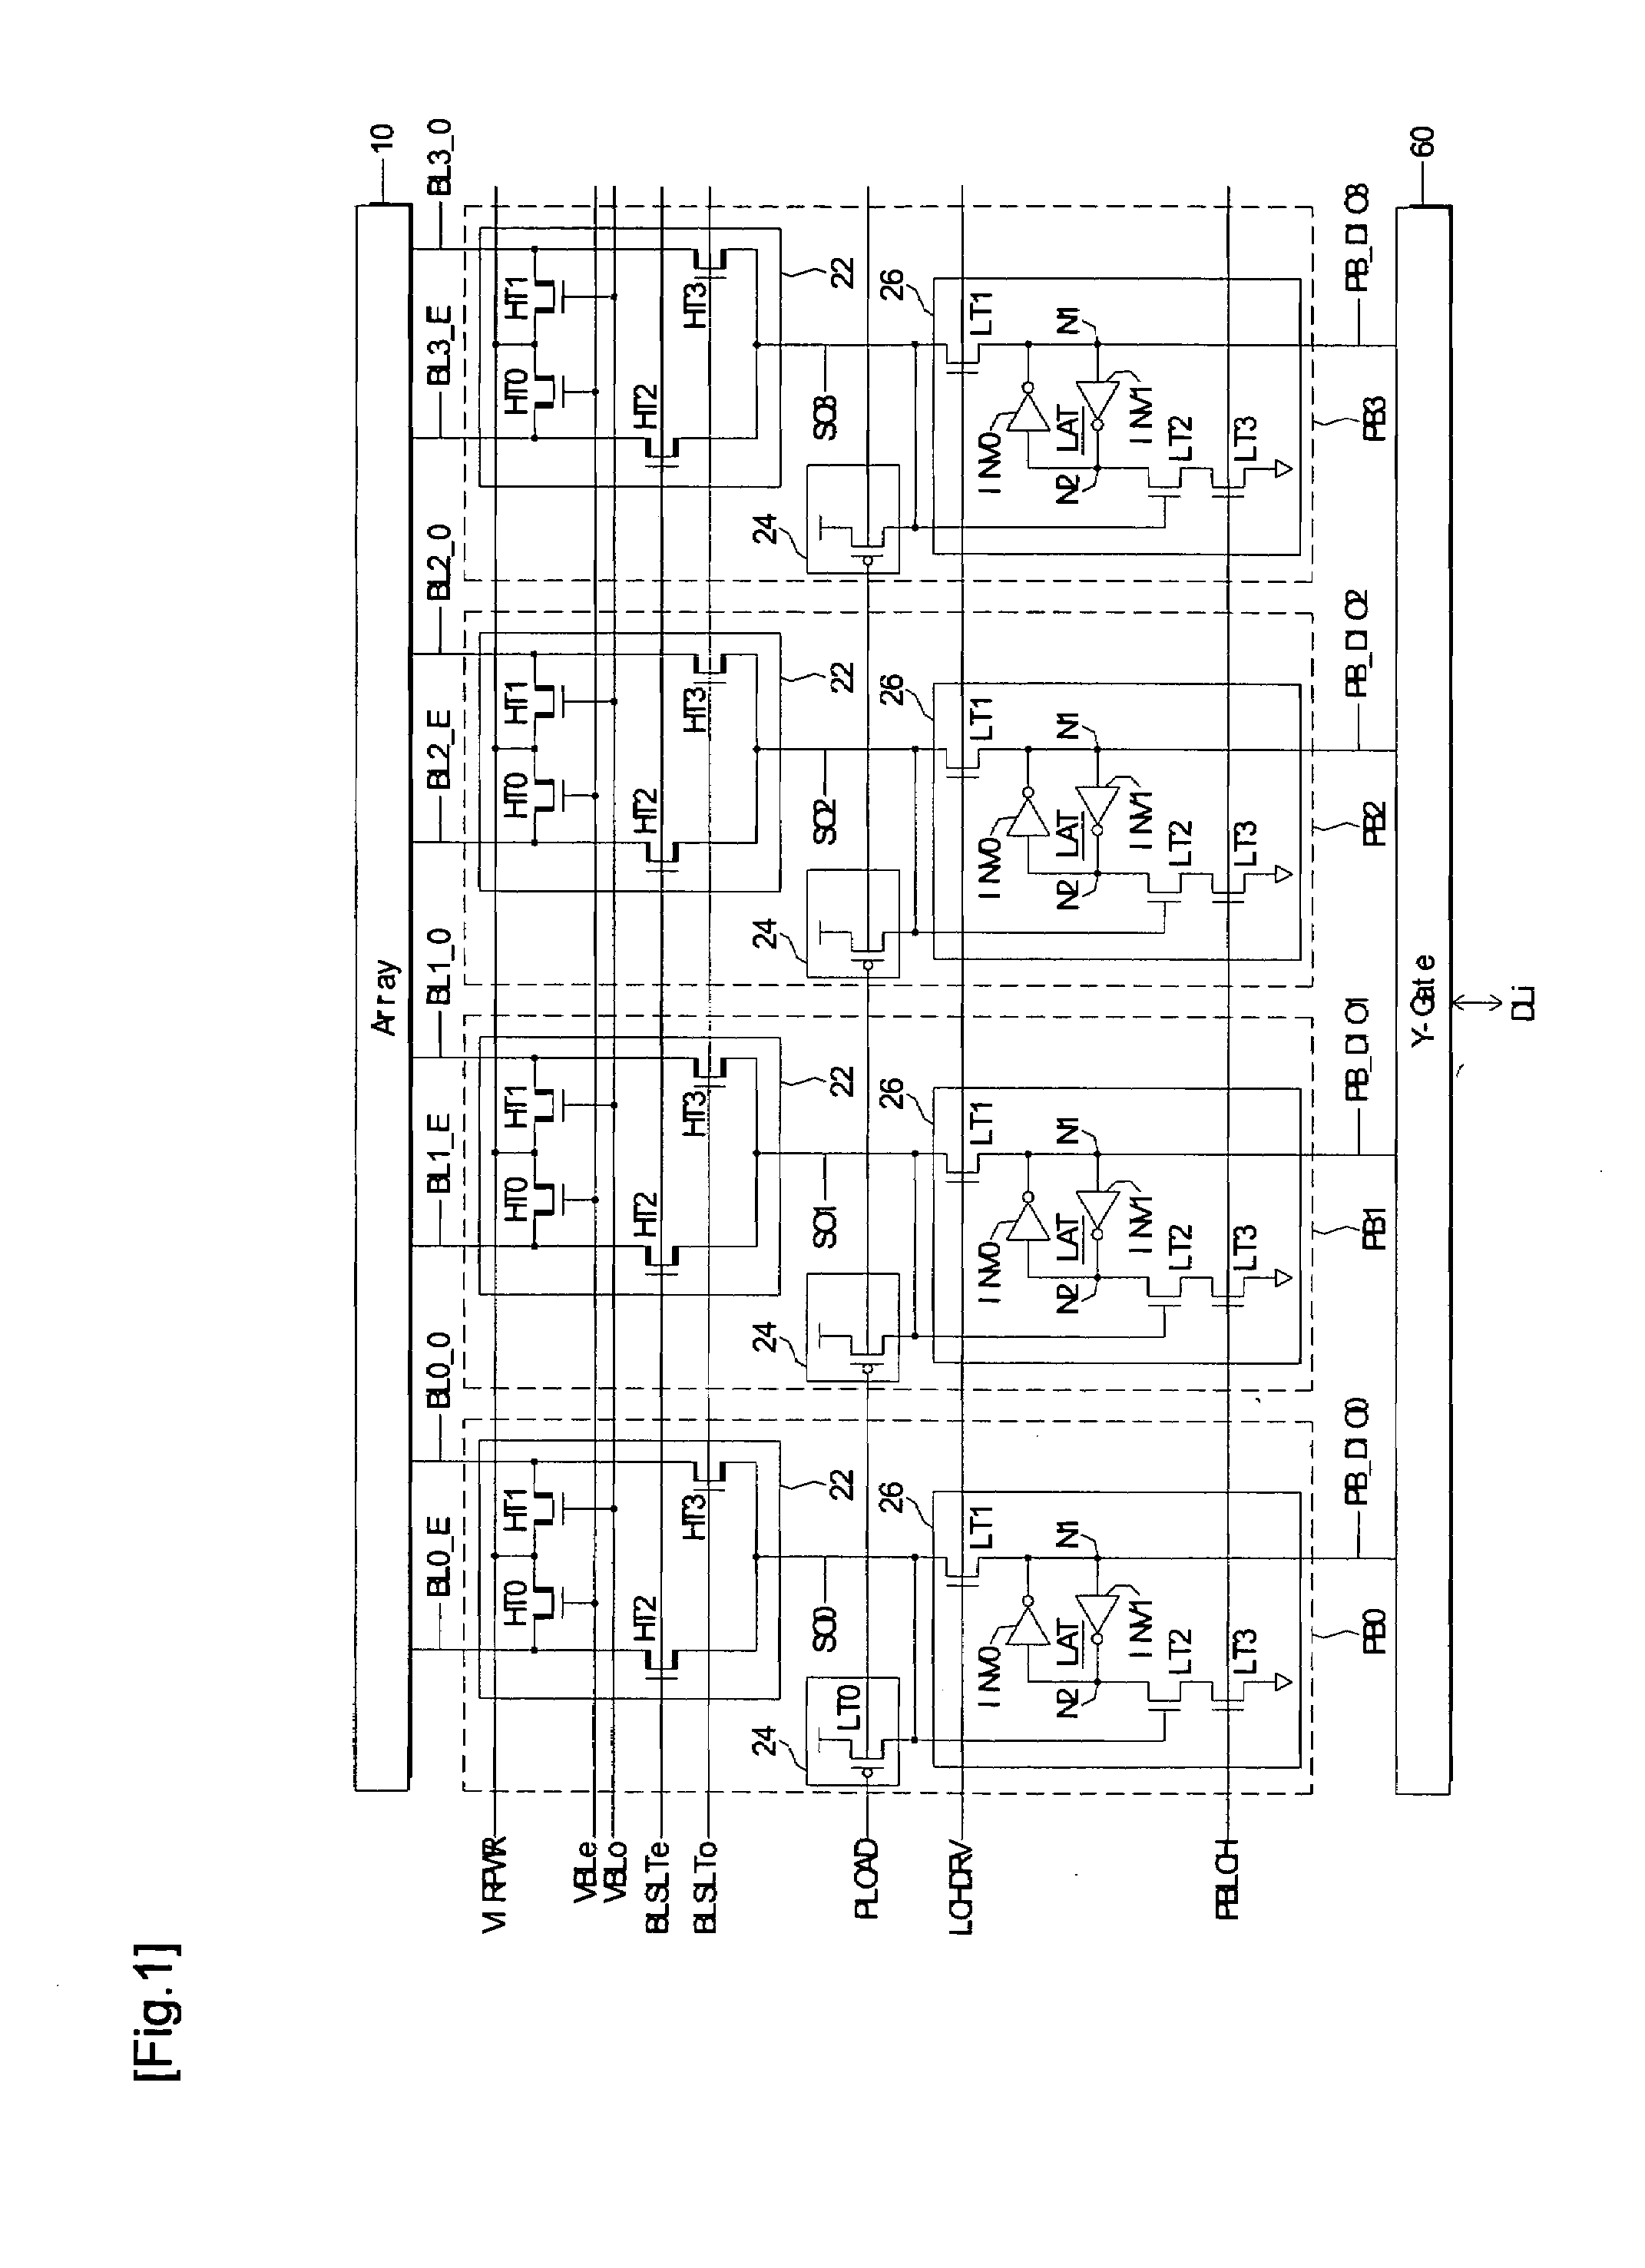 Semiconductor device for reducing coupling noise